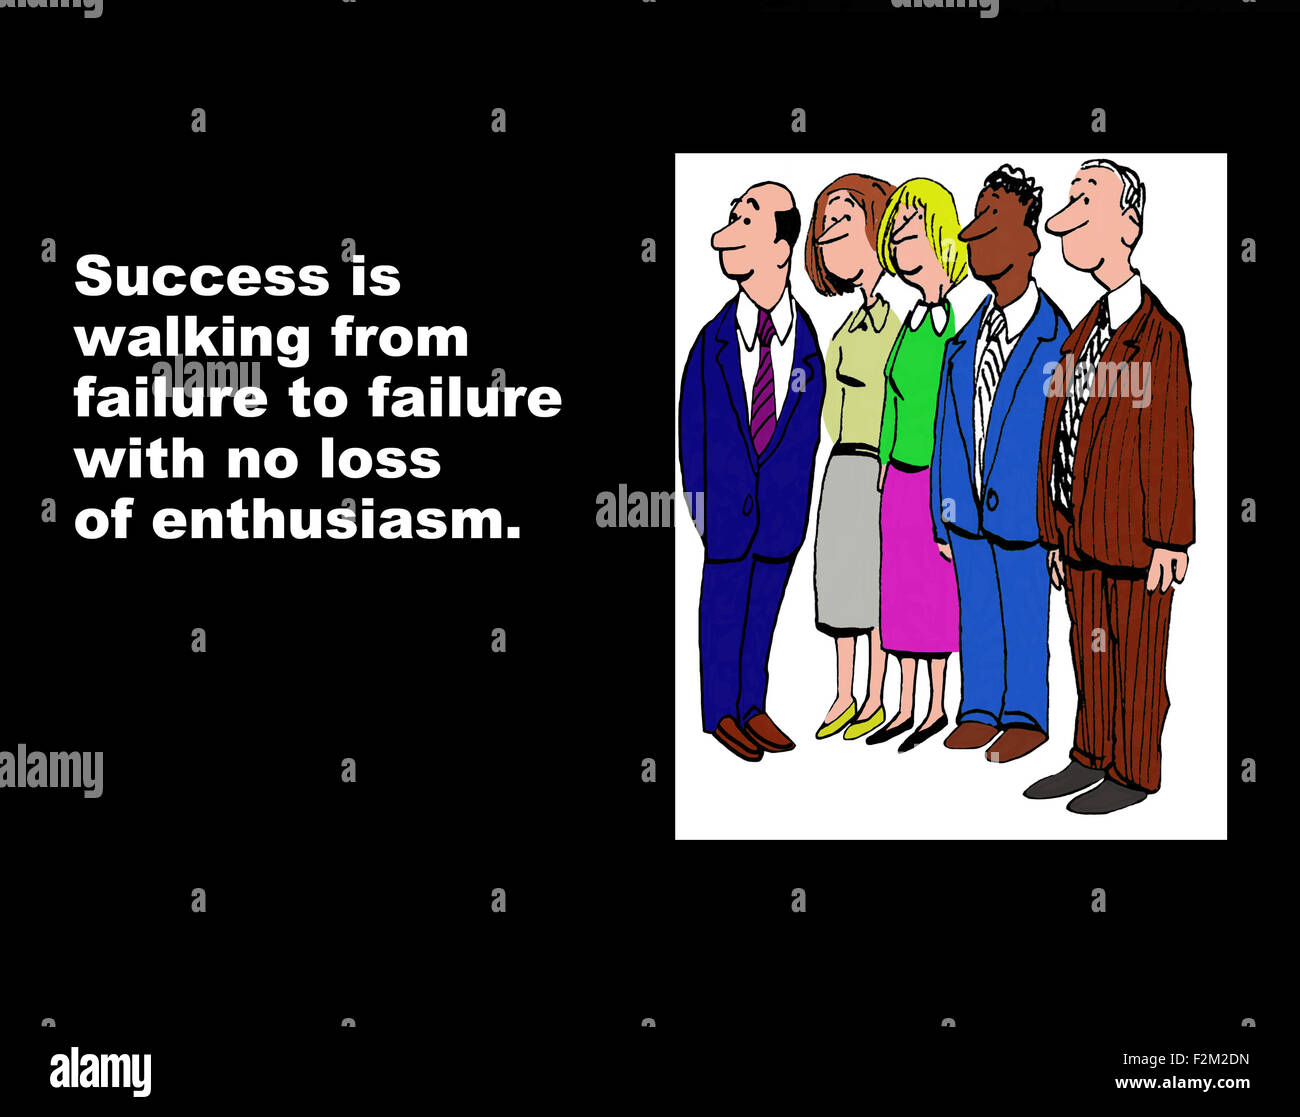 Business illustration of businesspeople and the words, 'Success is walking from failure to failure with no loss of enthusiasm'. Stock Photo